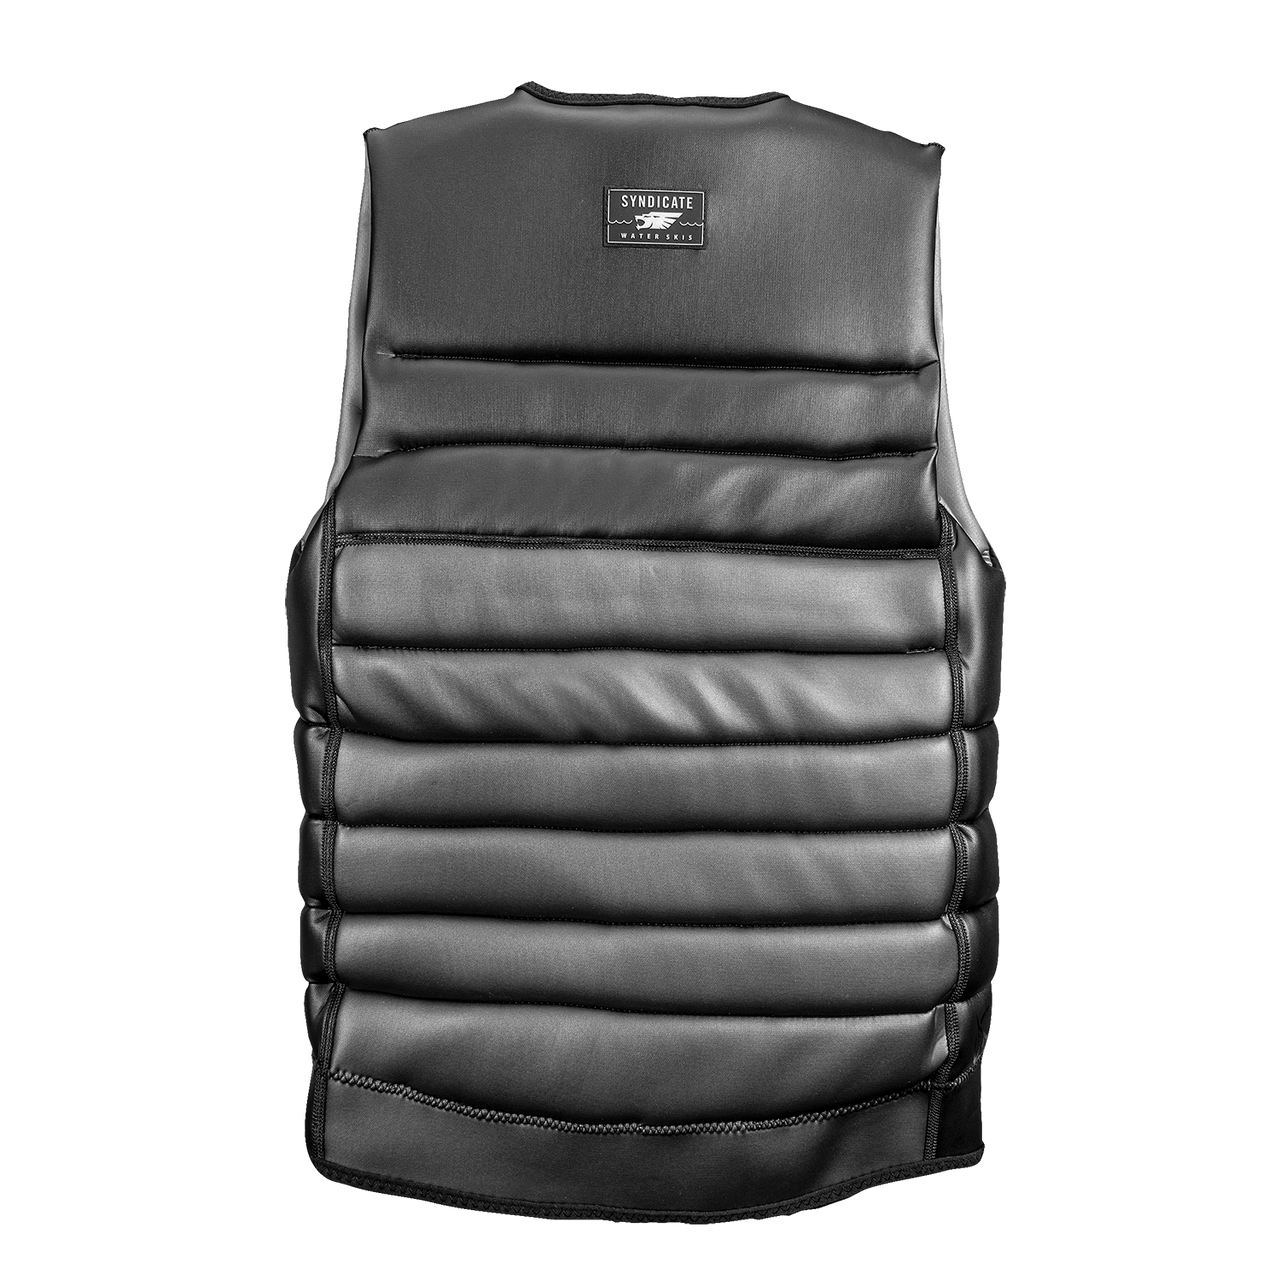 HO Sports NCGA Syndicate Pro Impact Vest | Some Sizes are on Pre-Order Basis